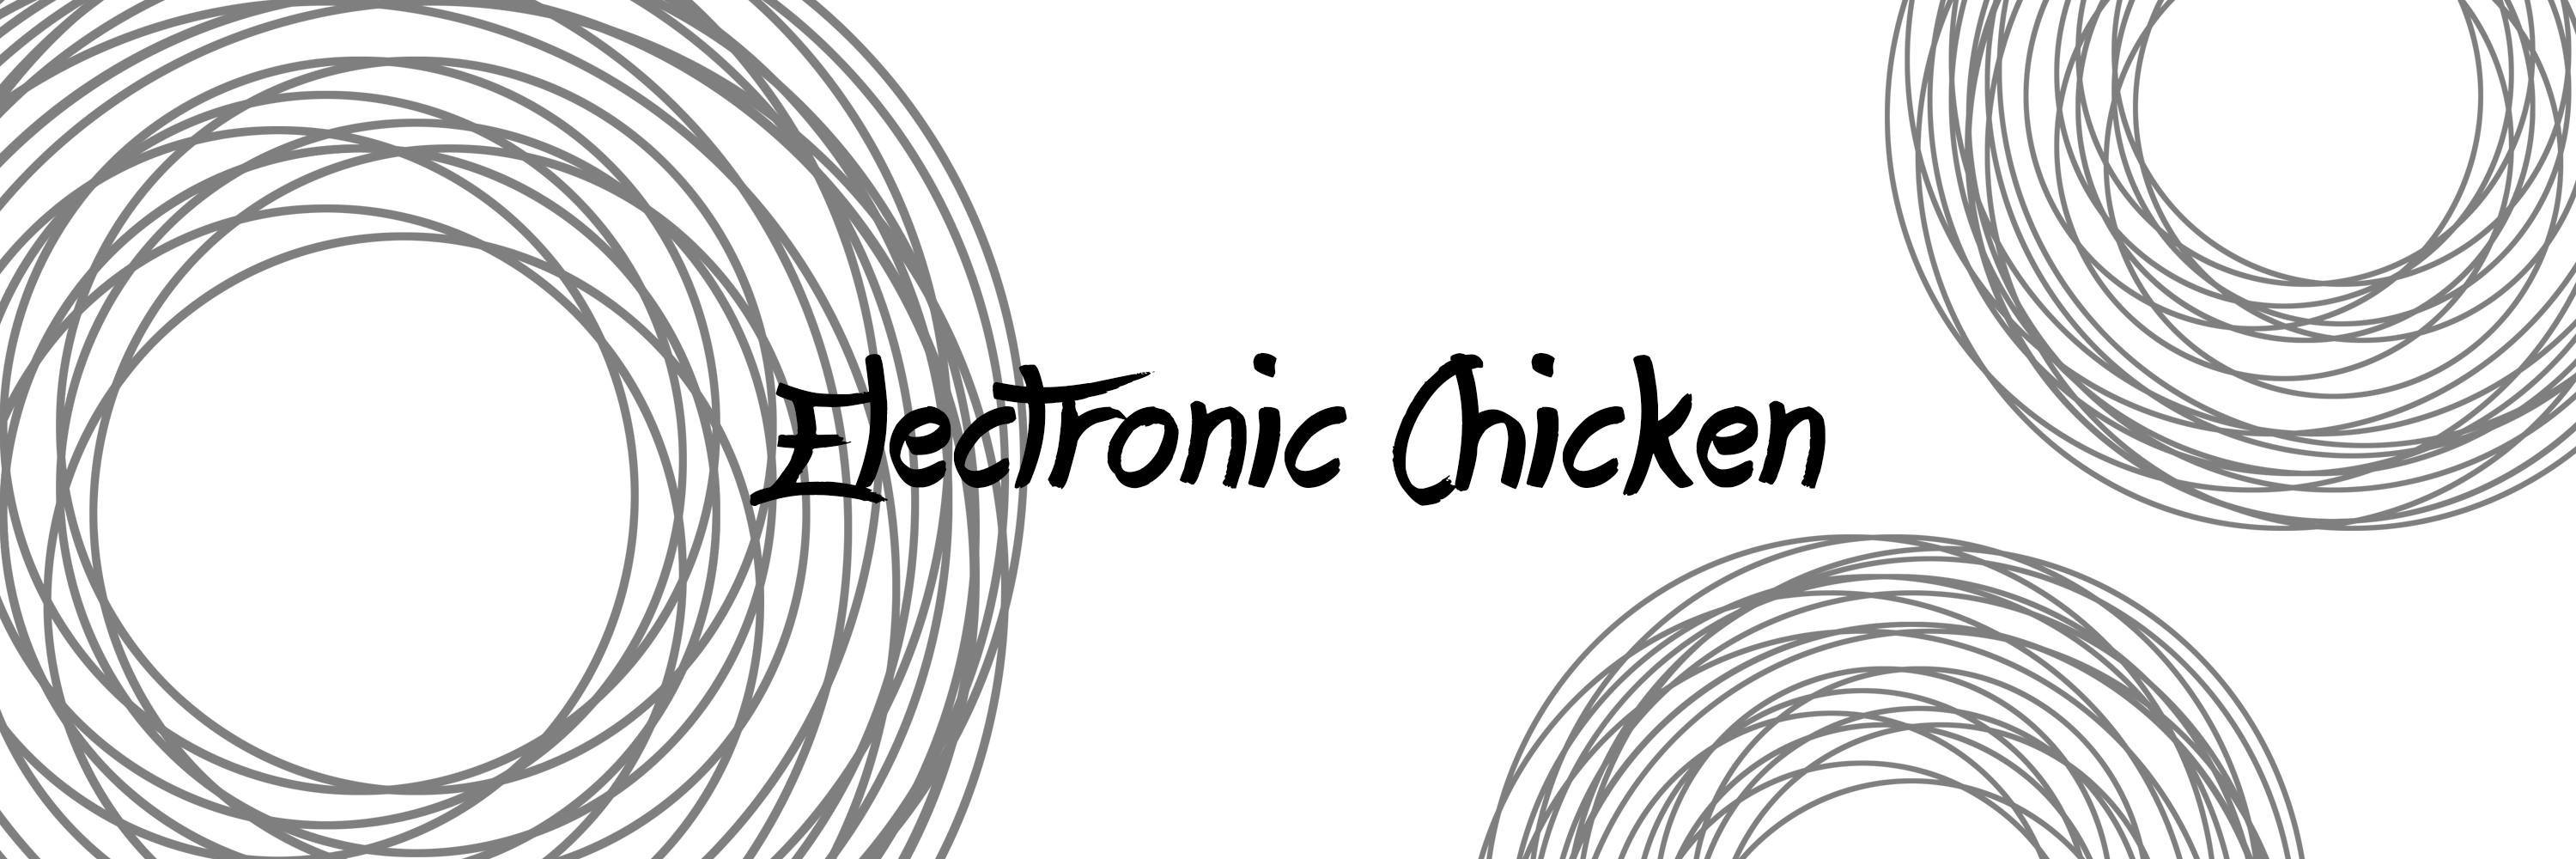 Electronic Chicken